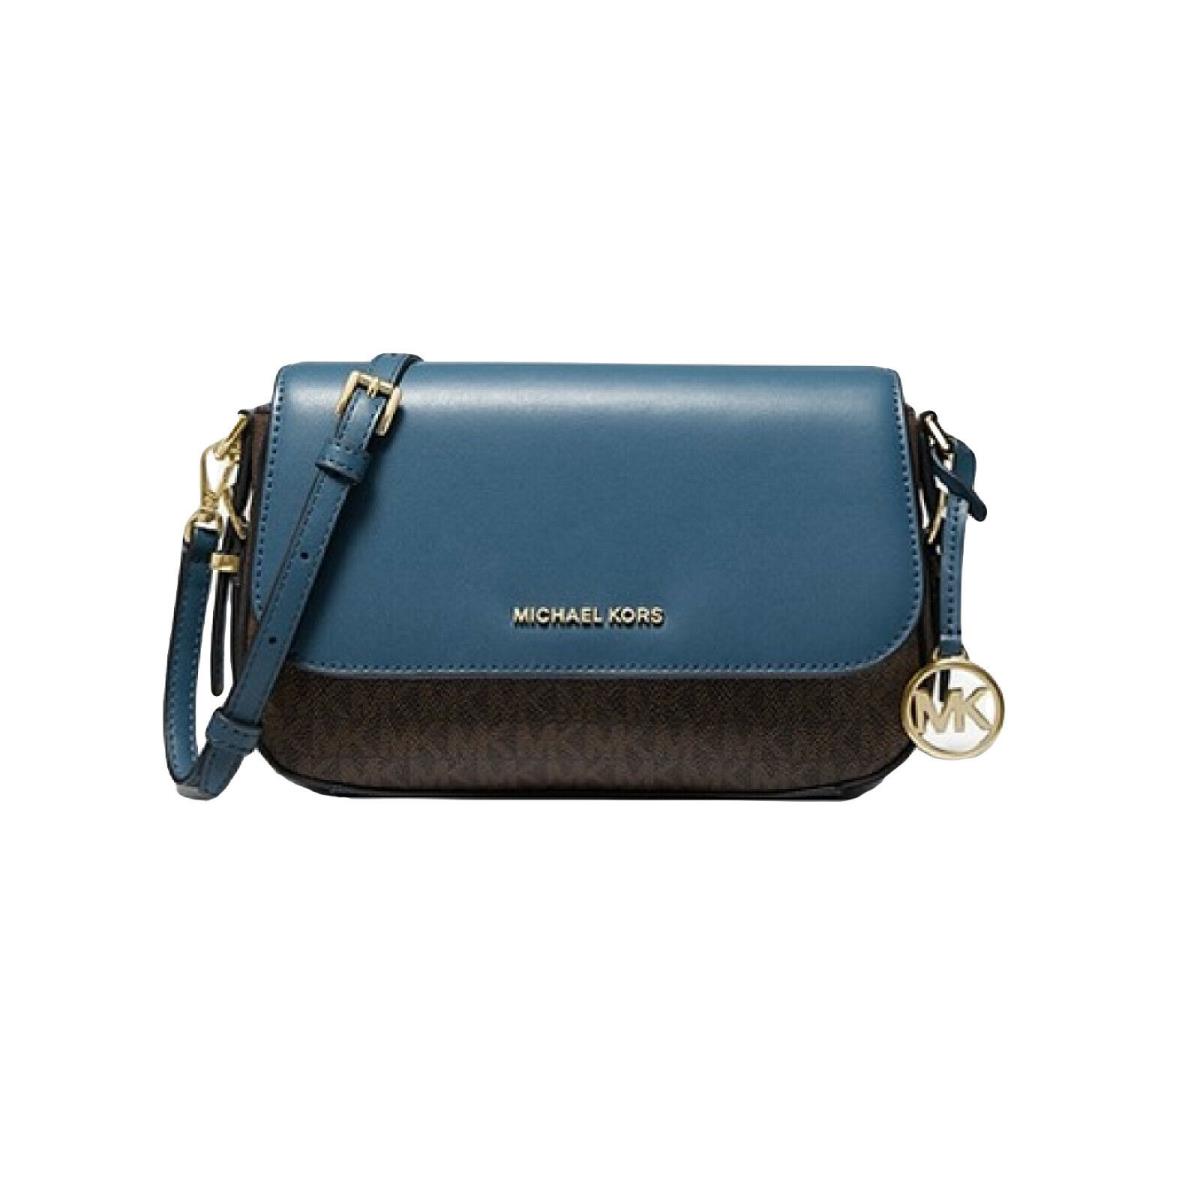 Michael Kors Bedford Legacy Large Logo and Pebbled Leather Crossbody Bag - Blue/Brown Exterior